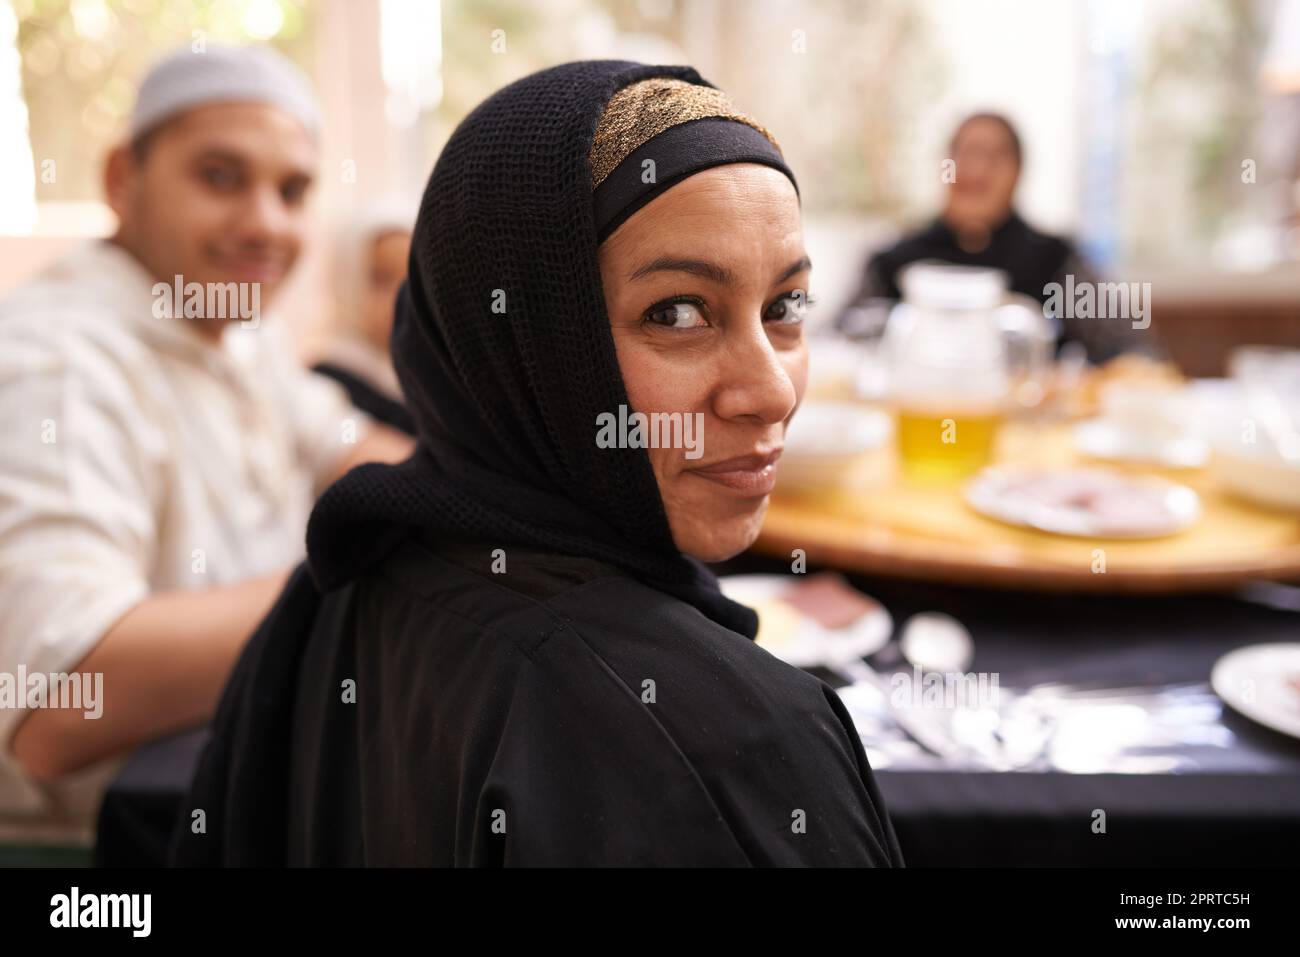 We always dine as a family. a muslim family eating together. Stock Photo